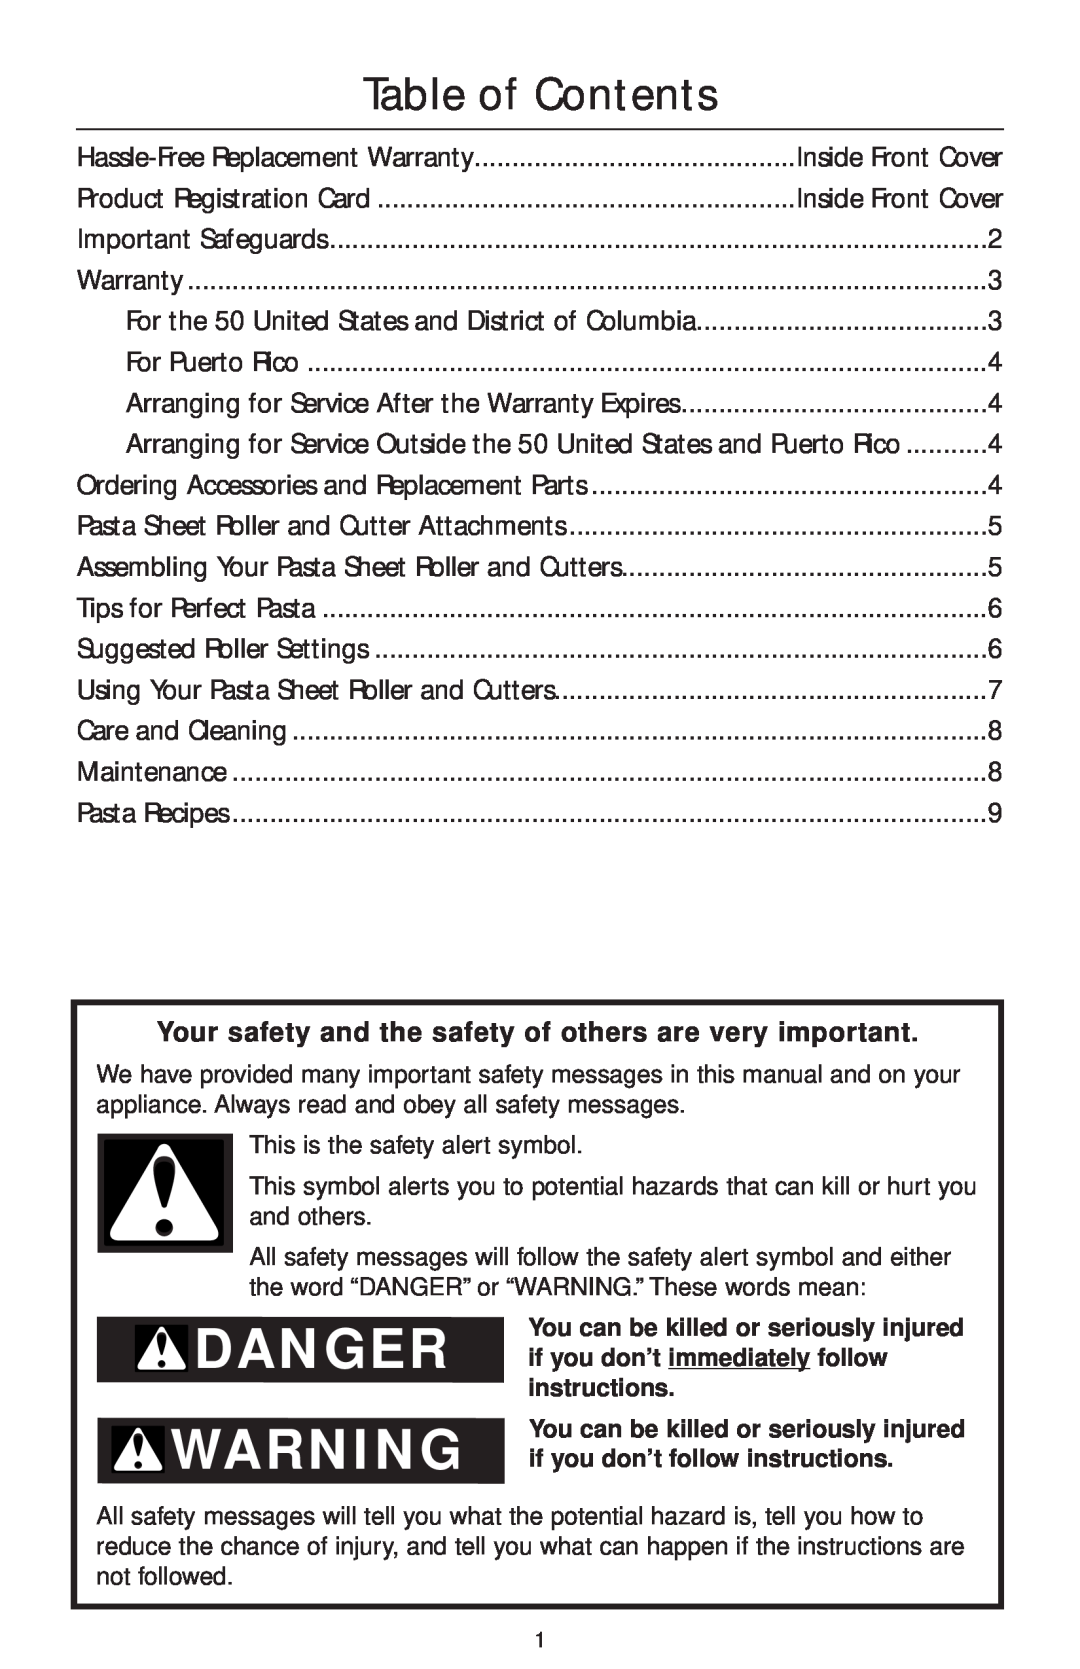 KitchenAid KPRA Table of Contents, Your safety and the safety of others are very important, Inside Front Cover, Warranty 